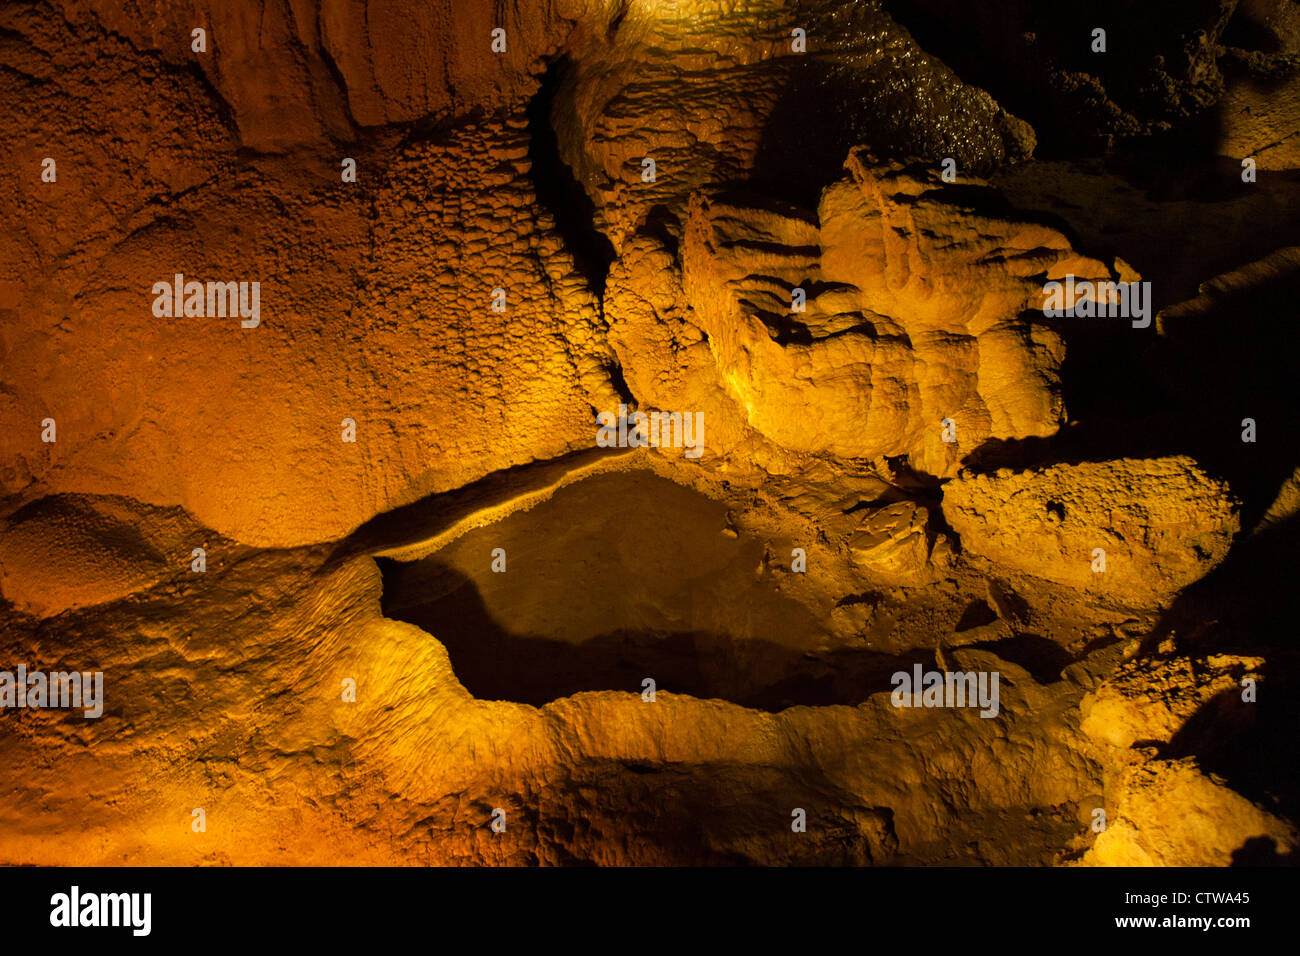 Formations in Blanchard Springs Caverns in Mountain View, Arkansas. Stock Photo